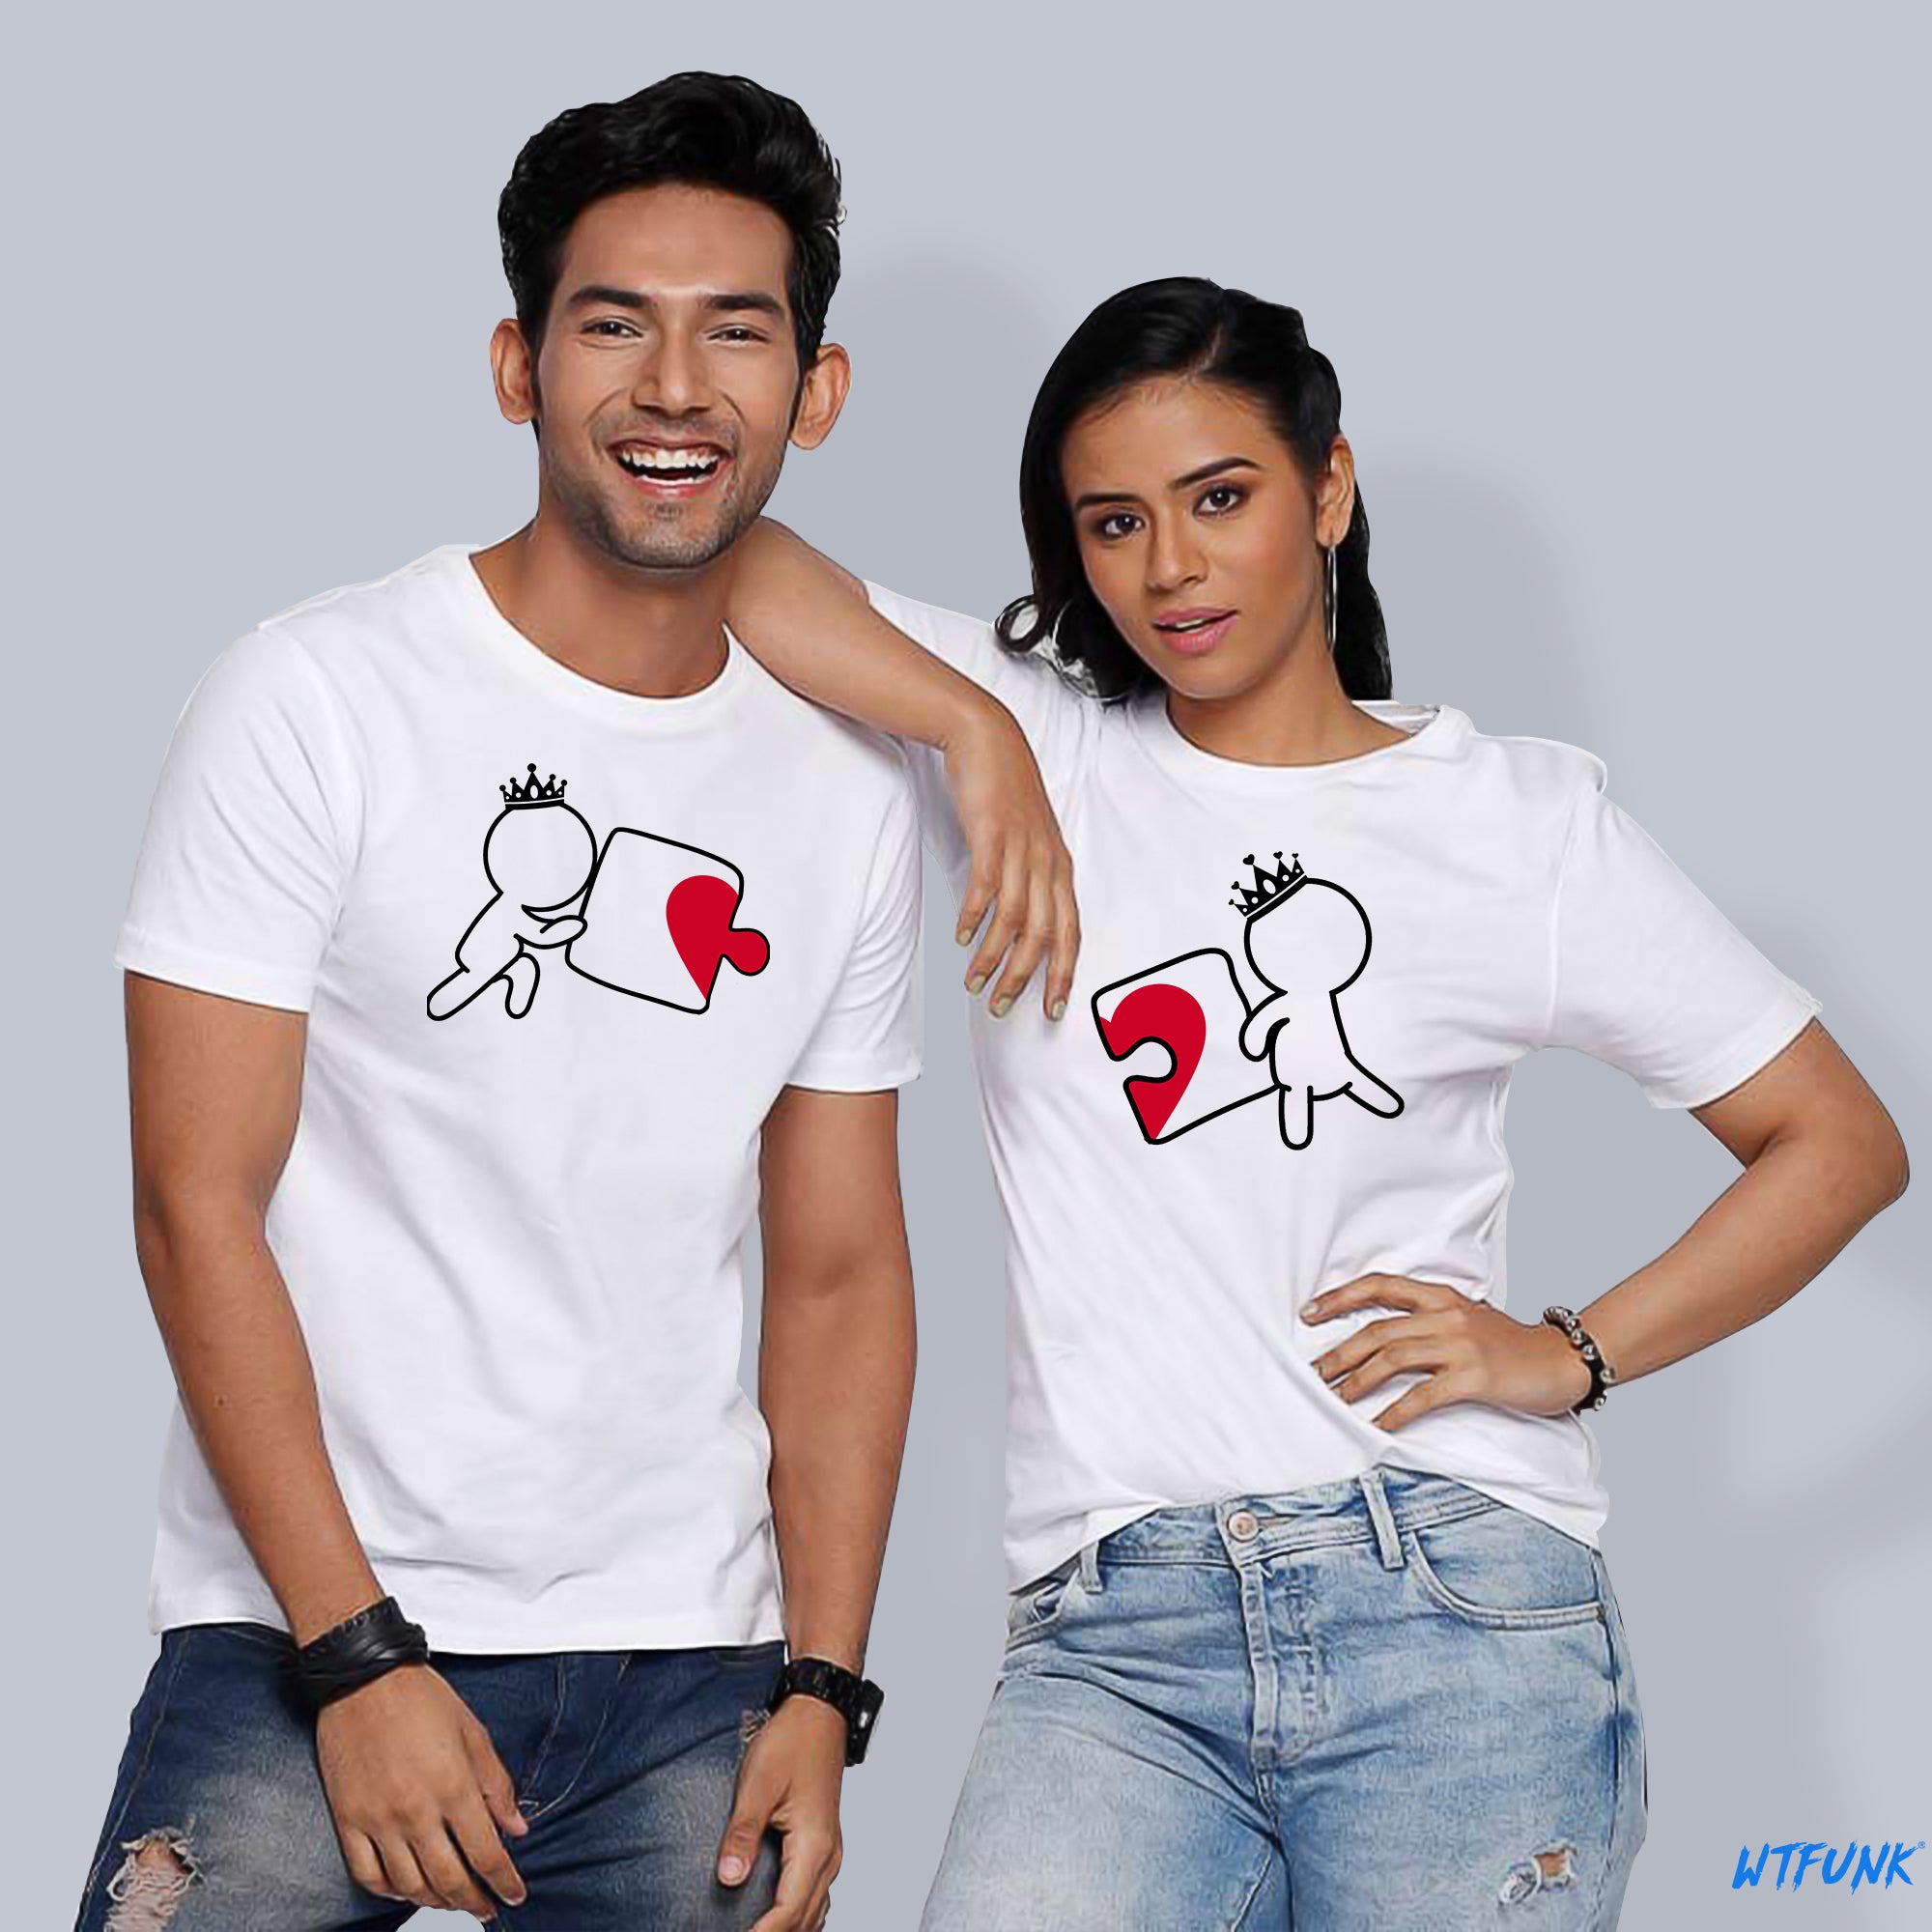 Buy T Shirt For Men And Women Online In India Couple T Shirts Wtfunk Wtfunk